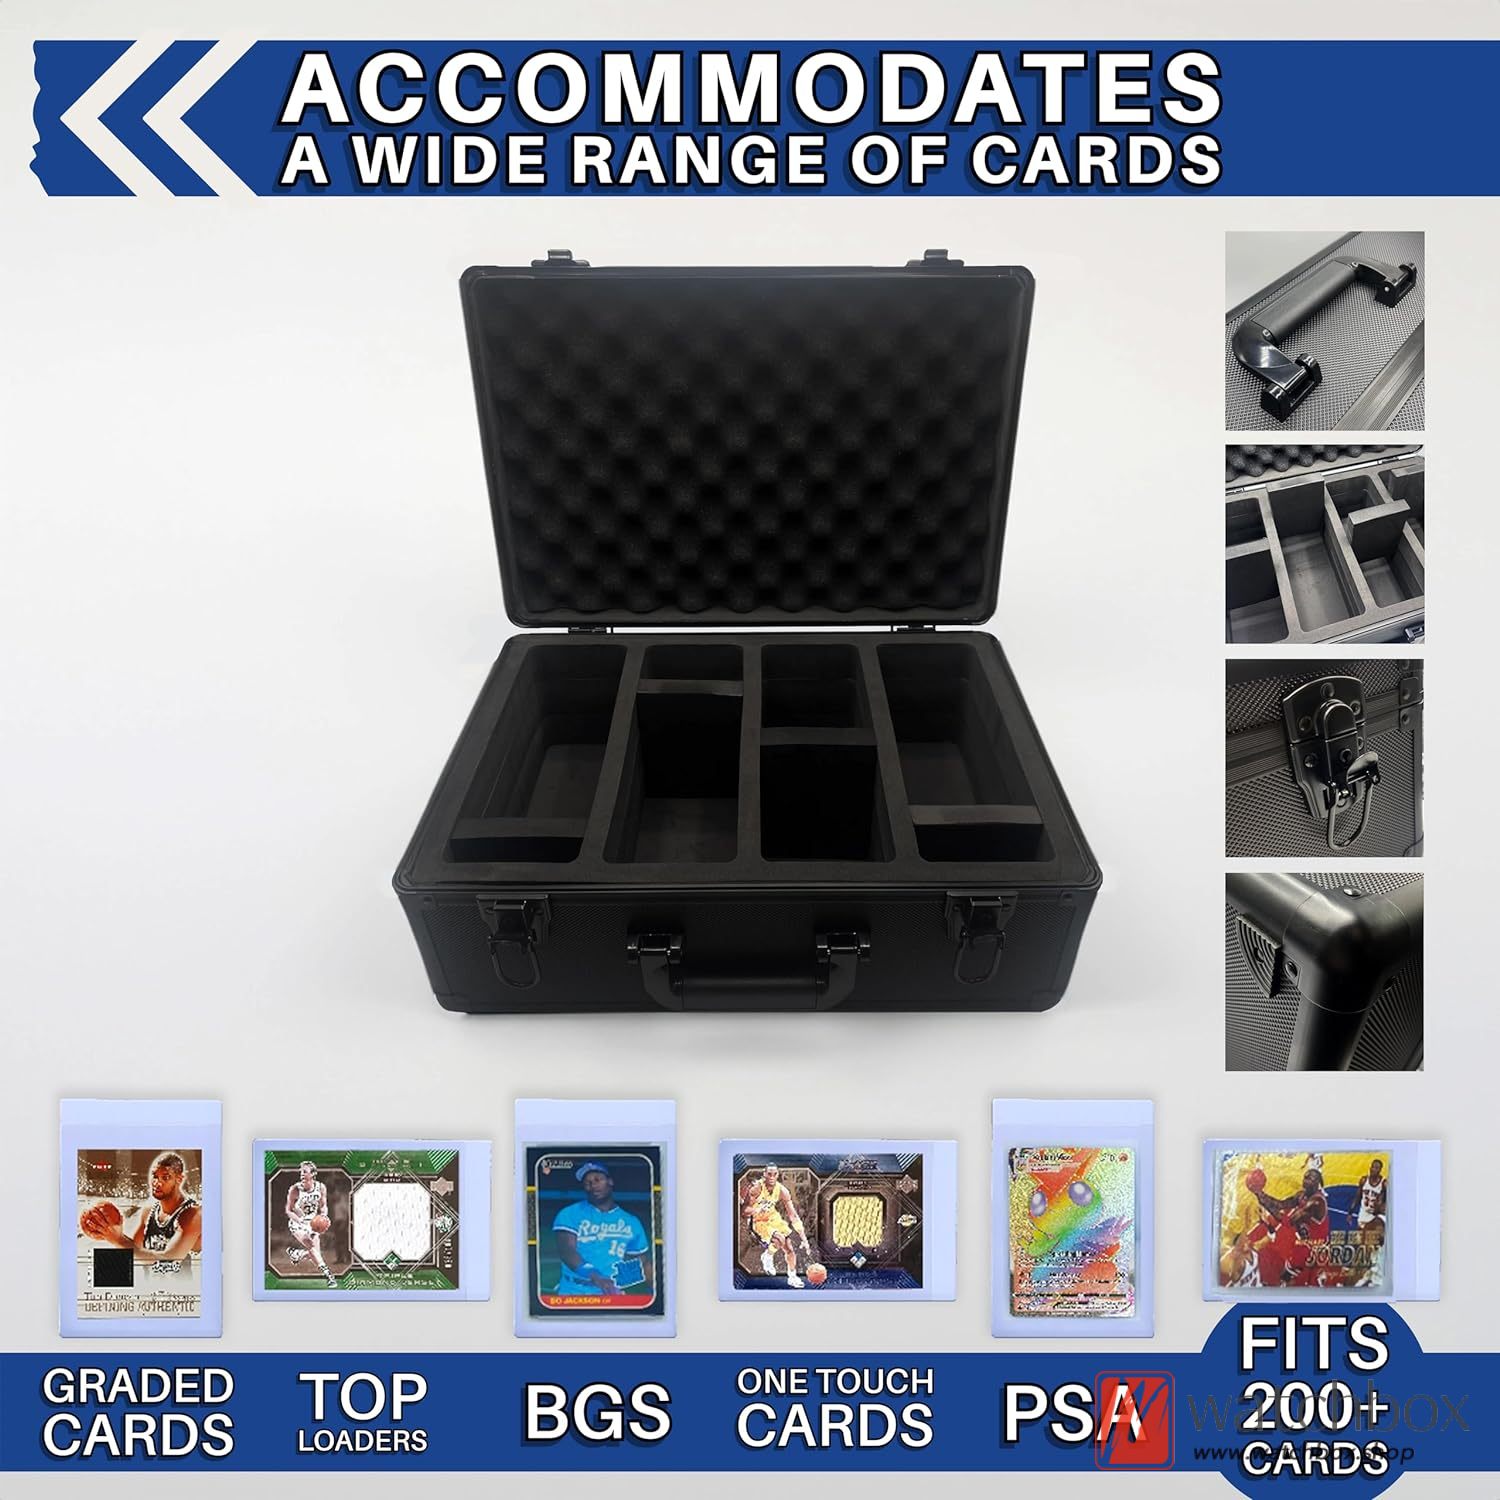 4 Row Hard-Shell Card Carrying Case Organizer Storage Case Box for Trading Cards, Sports Cards, Toploaders, and other Standard Sized Cards